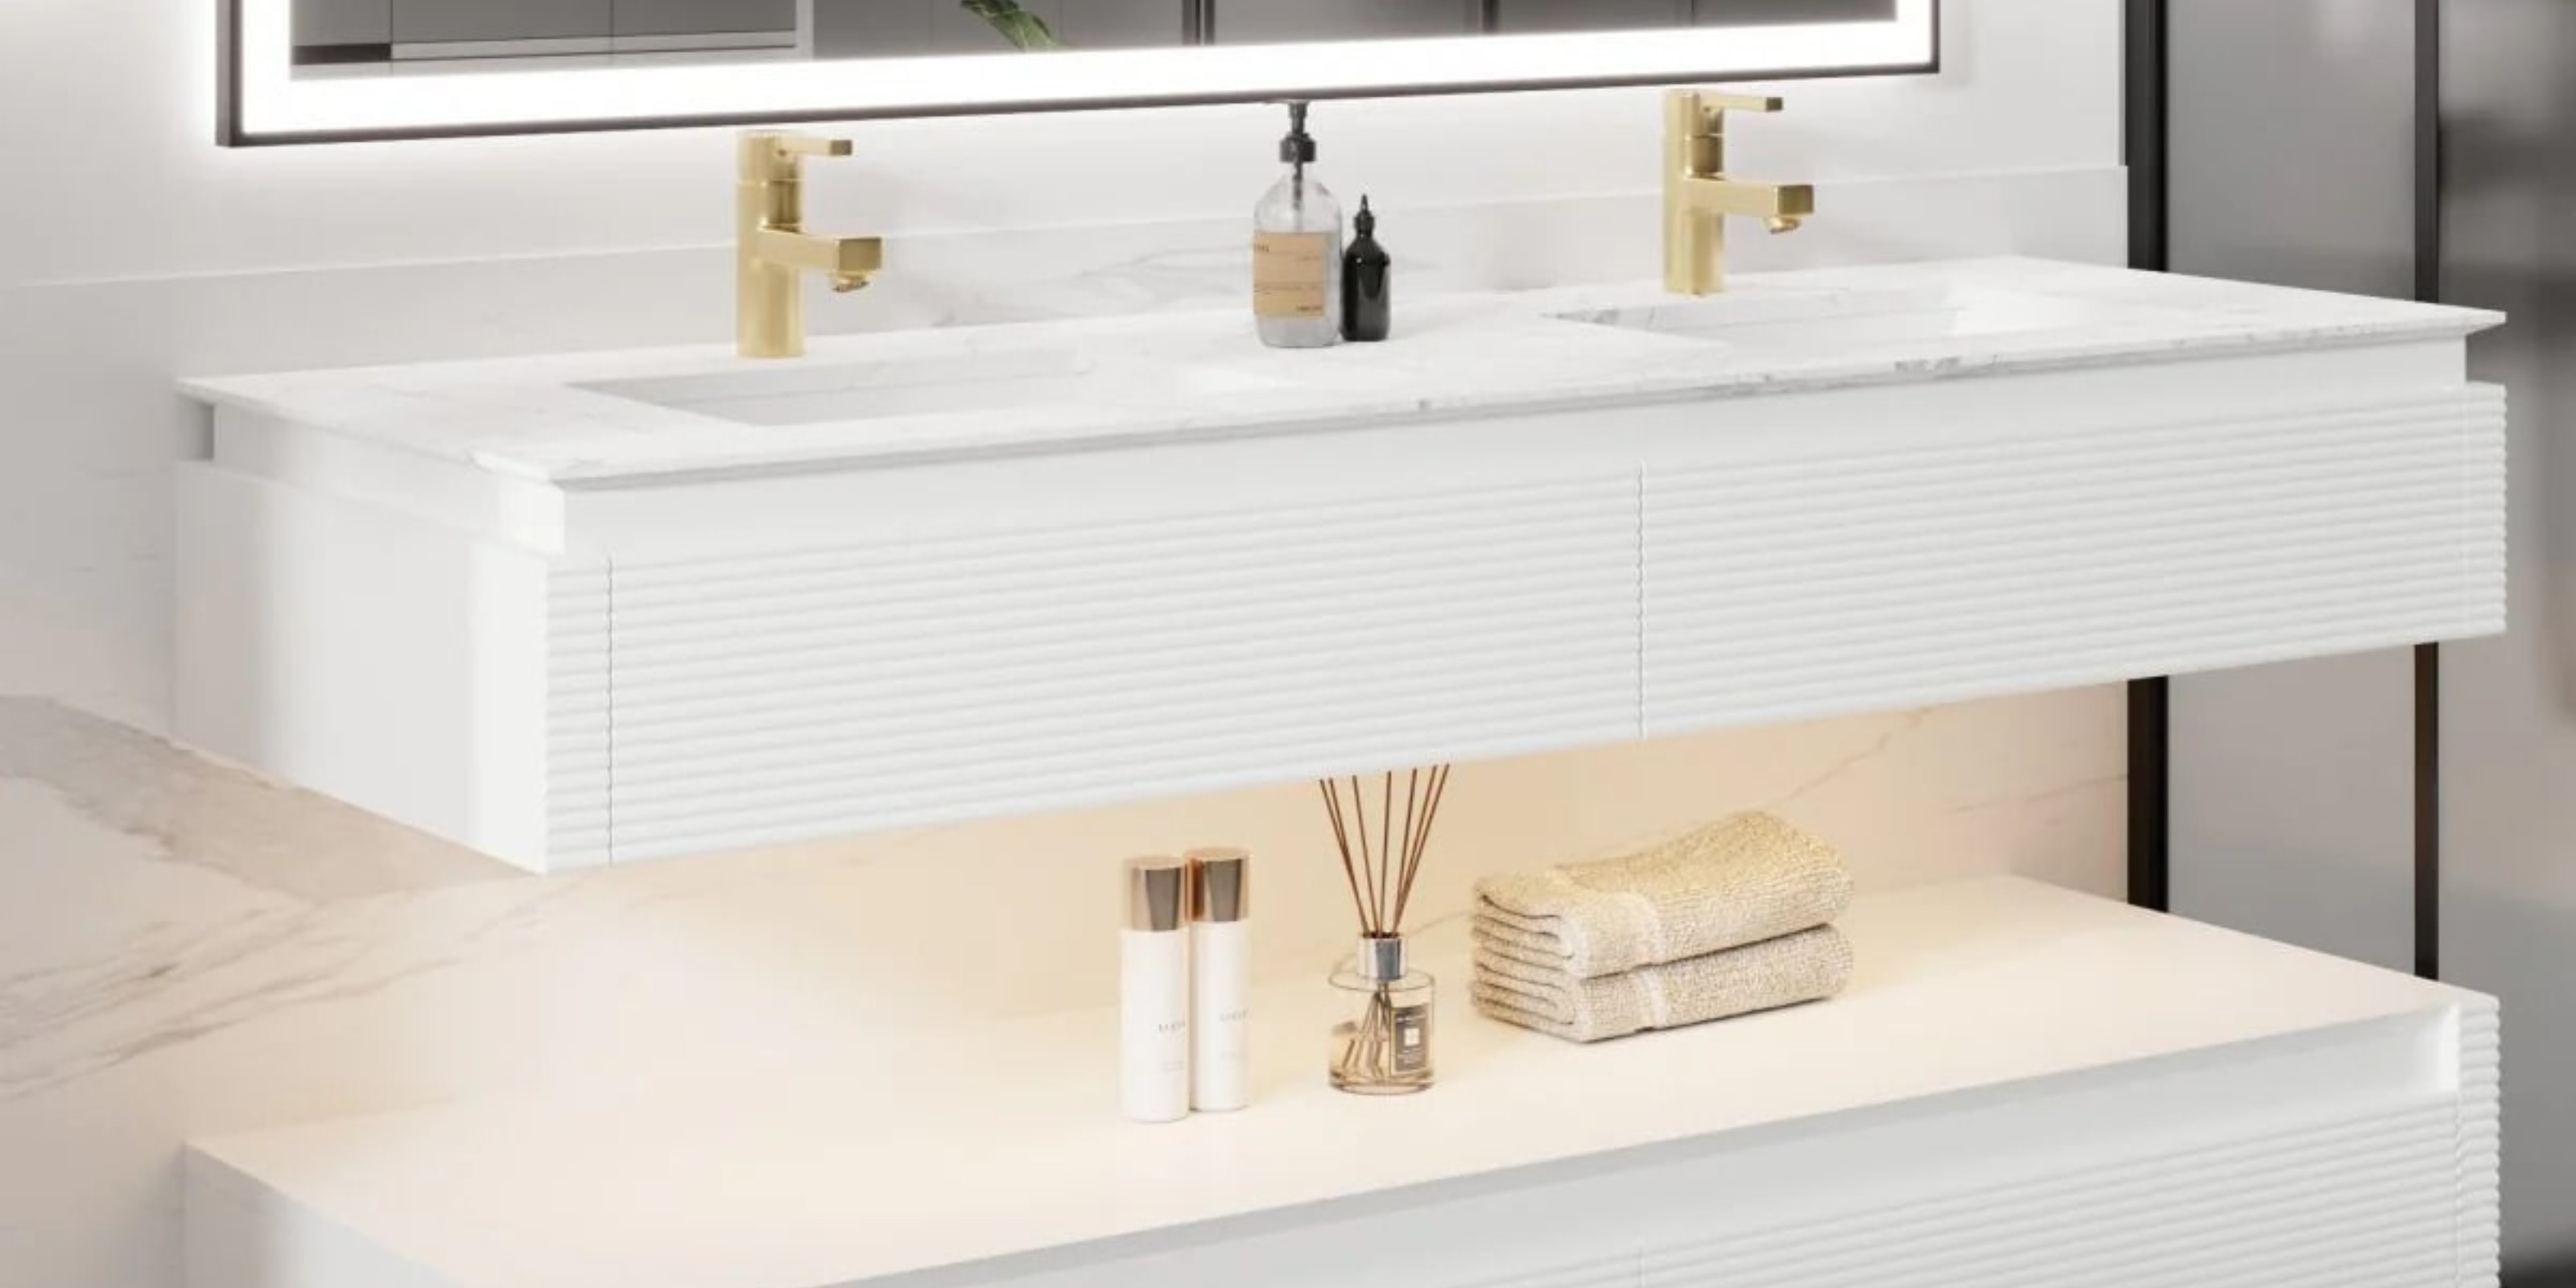 Crafted by elegance incarnate, this Luxury Bathroom Vanity has no competitors.